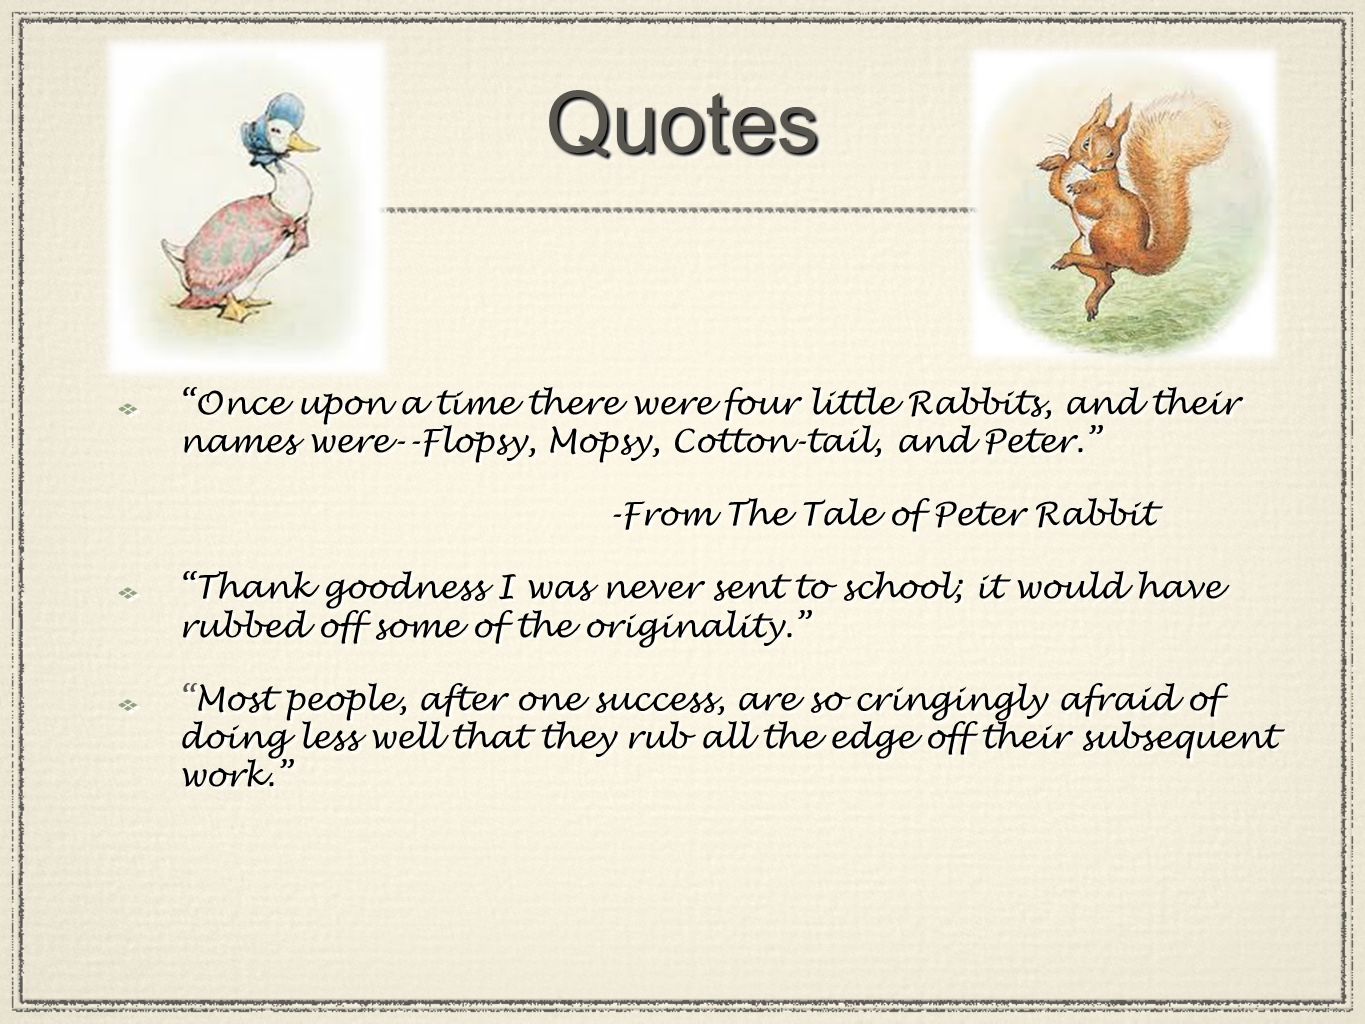 QuotesQuotes Once upon a time there were four little Rabbits, and their names were--Flopsy, Mopsy, Cotton-tail, and Peter. -From The Tale of Peter Rabbit Thank goodness I was never sent to school; it would have rubbed off some of the originality. Most people, after one success, are so cringingly afraid of doing less well that they rub all the edge off their subsequent work. Once upon a time there were four little Rabbits, and their names were--Flopsy, Mopsy, Cotton-tail, and Peter. -From The Tale of Peter Rabbit Thank goodness I was never sent to school; it would have rubbed off some of the originality. Most people, after one success, are so cringingly afraid of doing less well that they rub all the edge off their subsequent work.